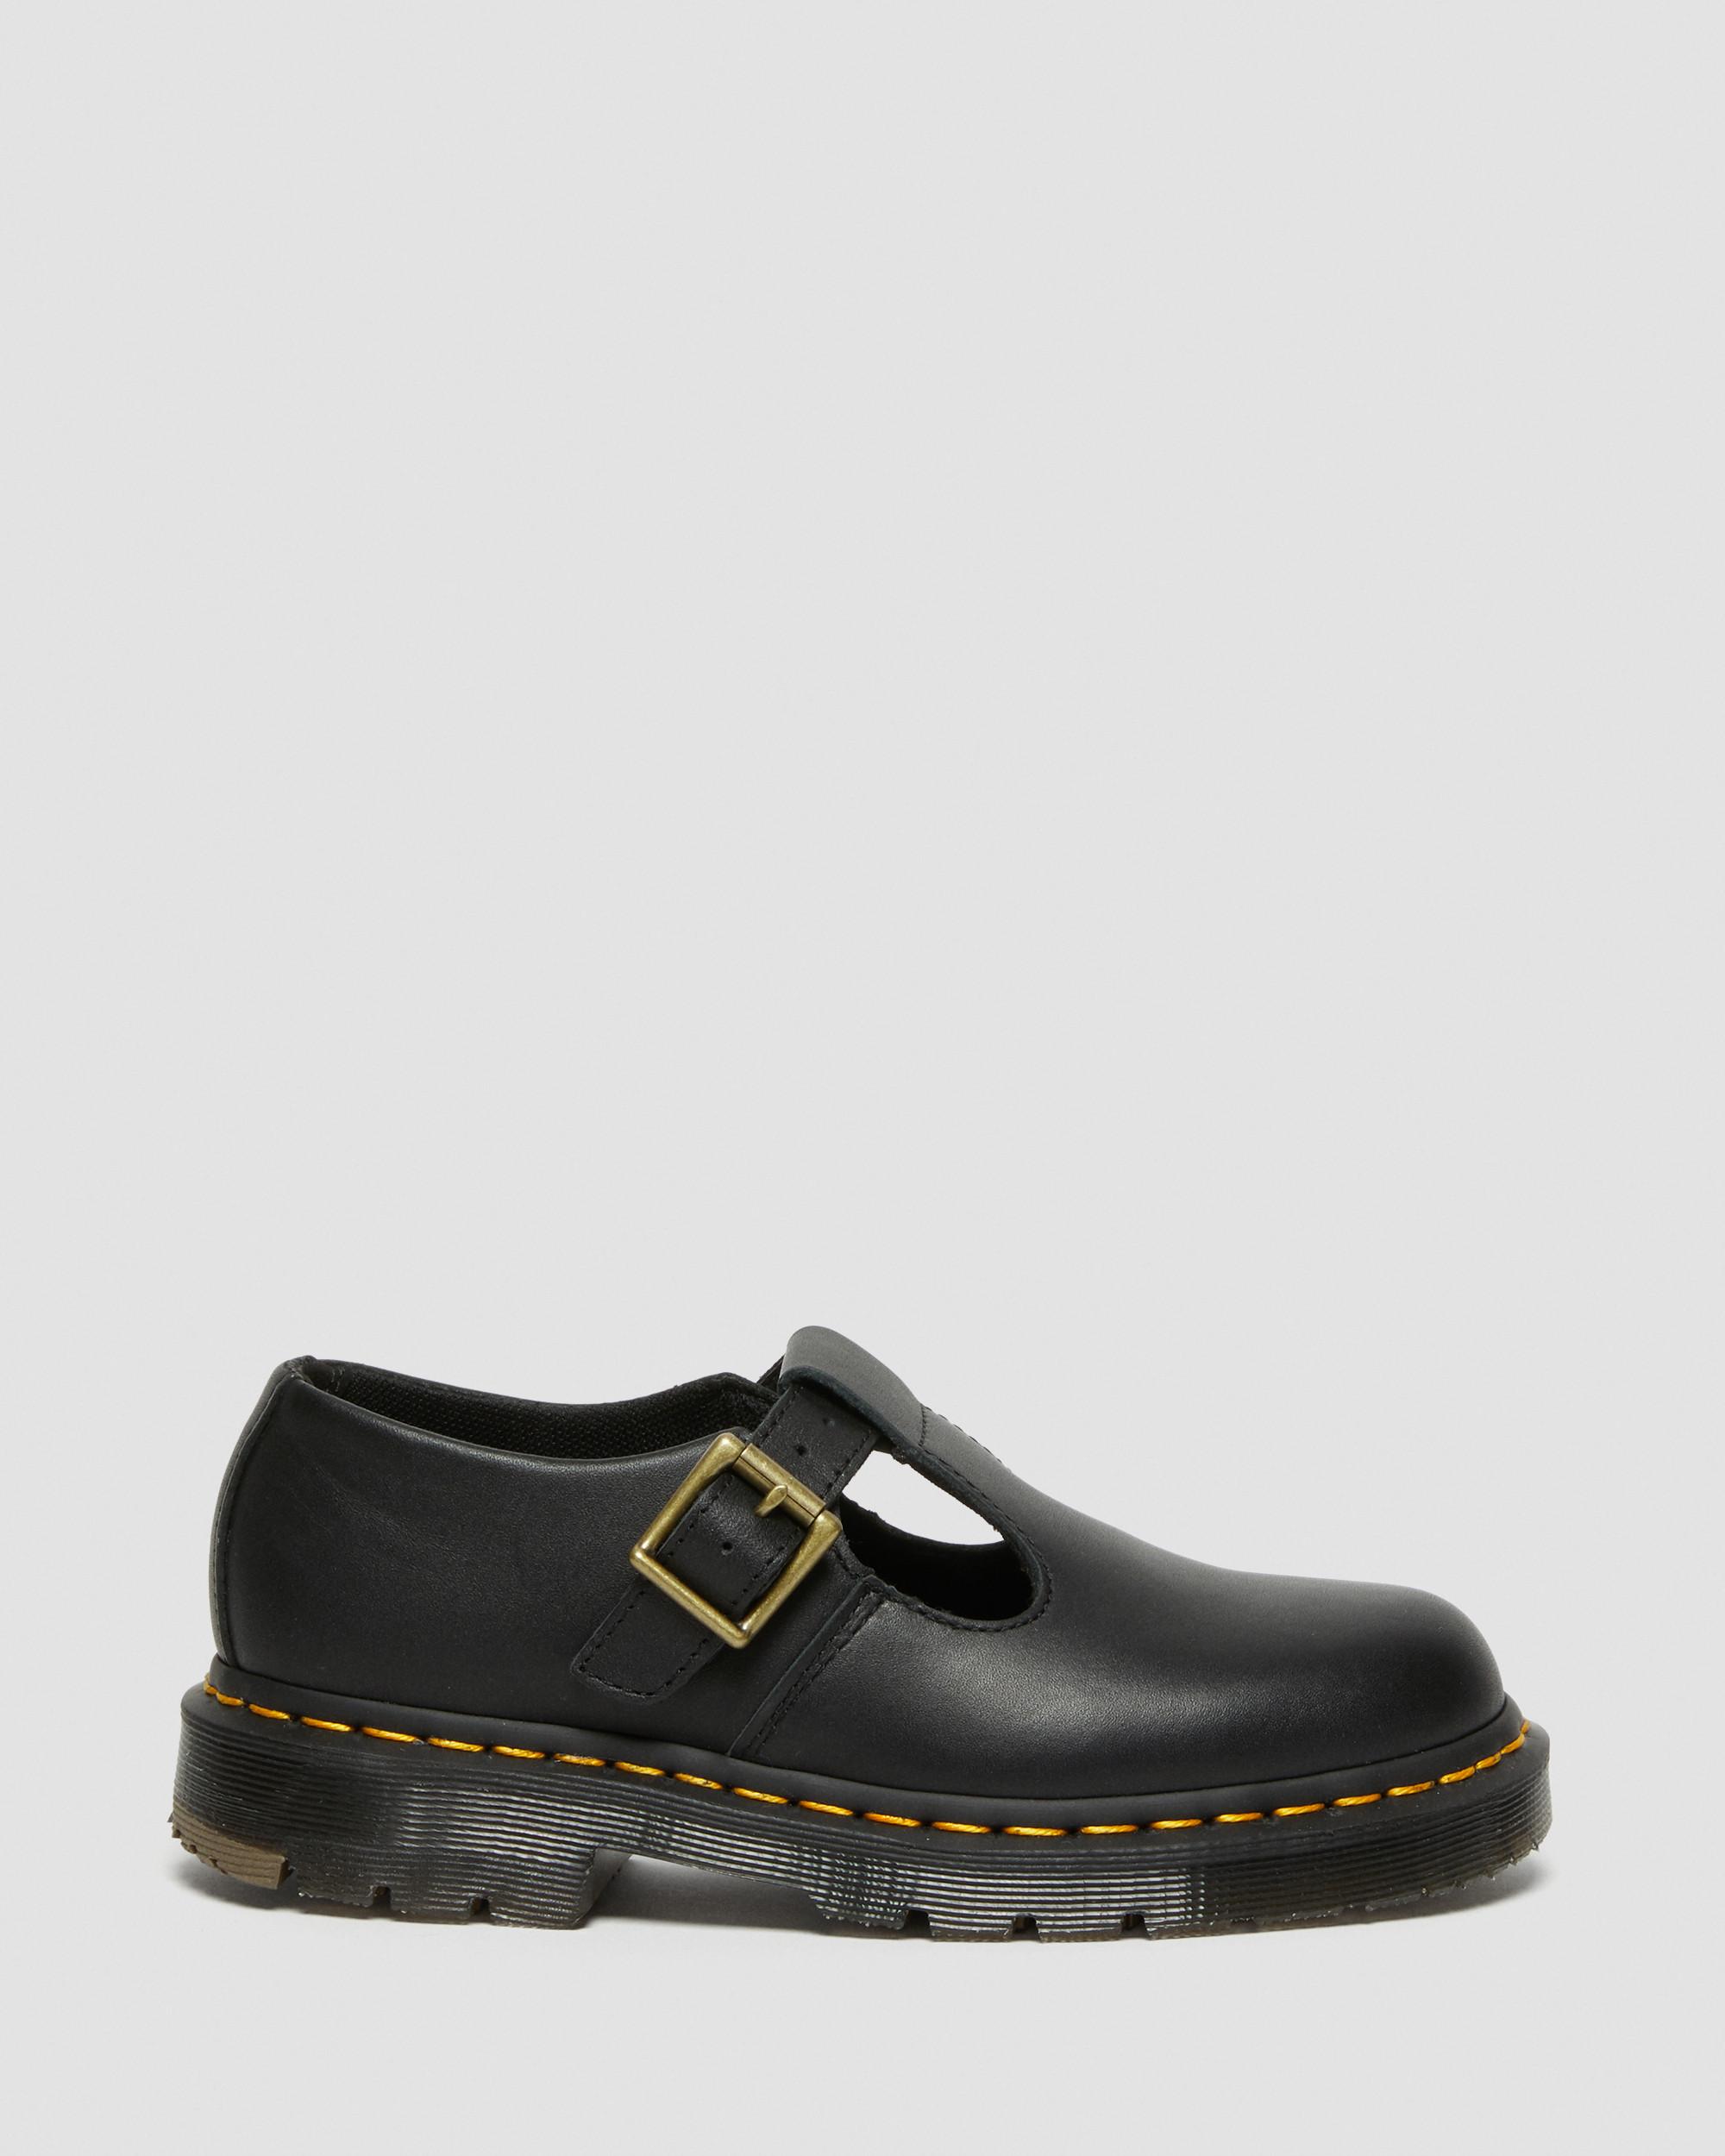 Polley Women's Slip Resistant Mary Jane Shoes in Black | Dr. Martens